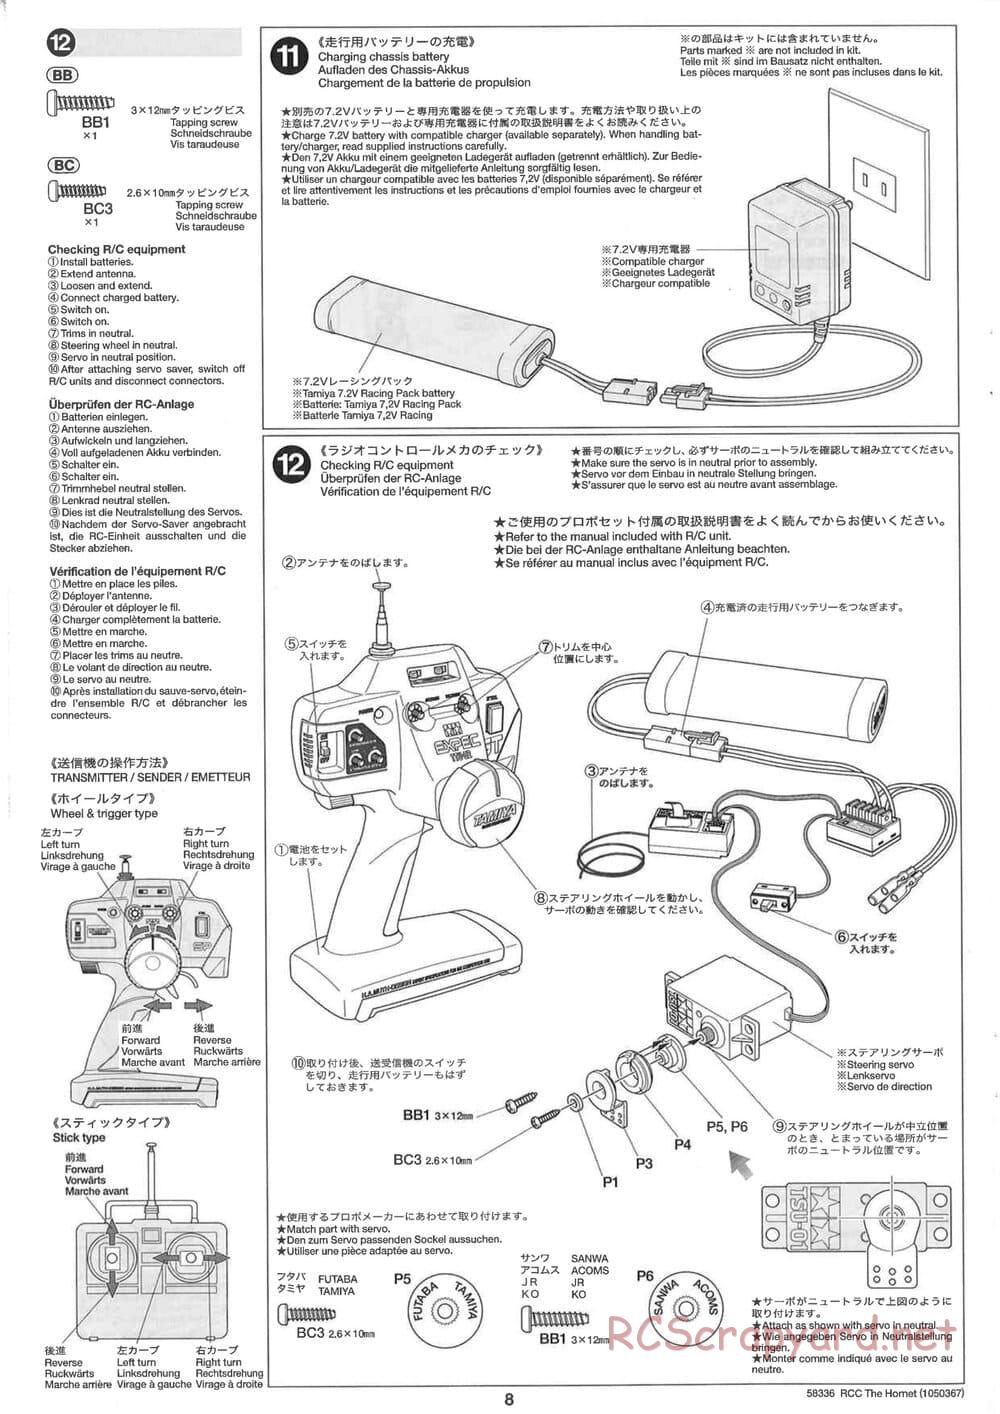 Tamiya - The Hornet (2004) - GH Chassis - Manual - Page 8